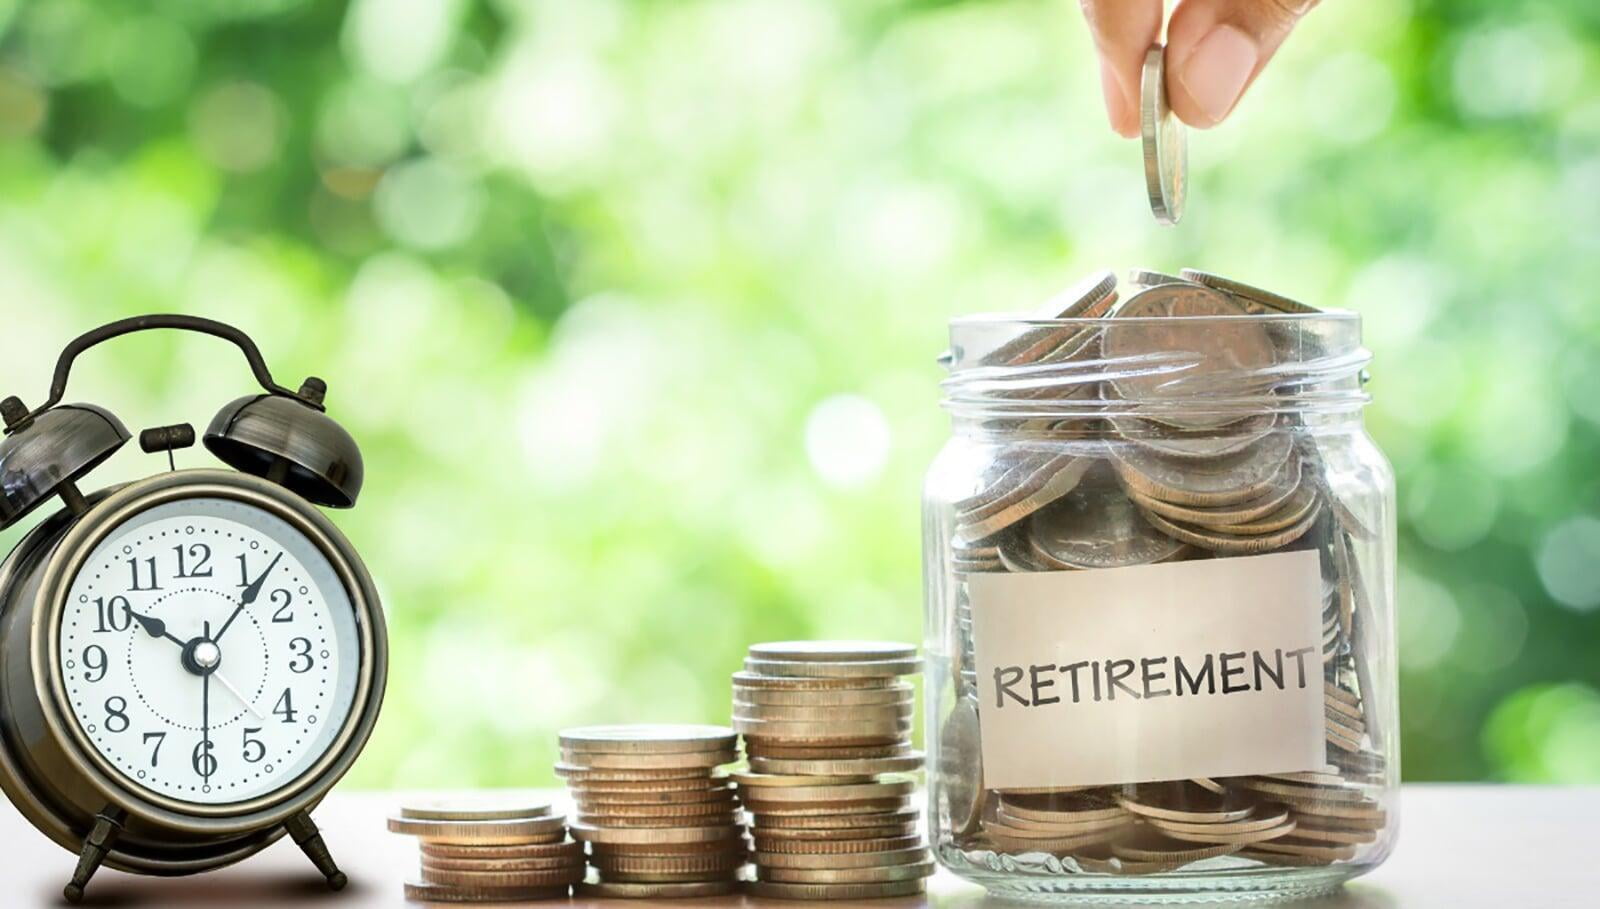 4 Crucial Steps When Planning For Retirement